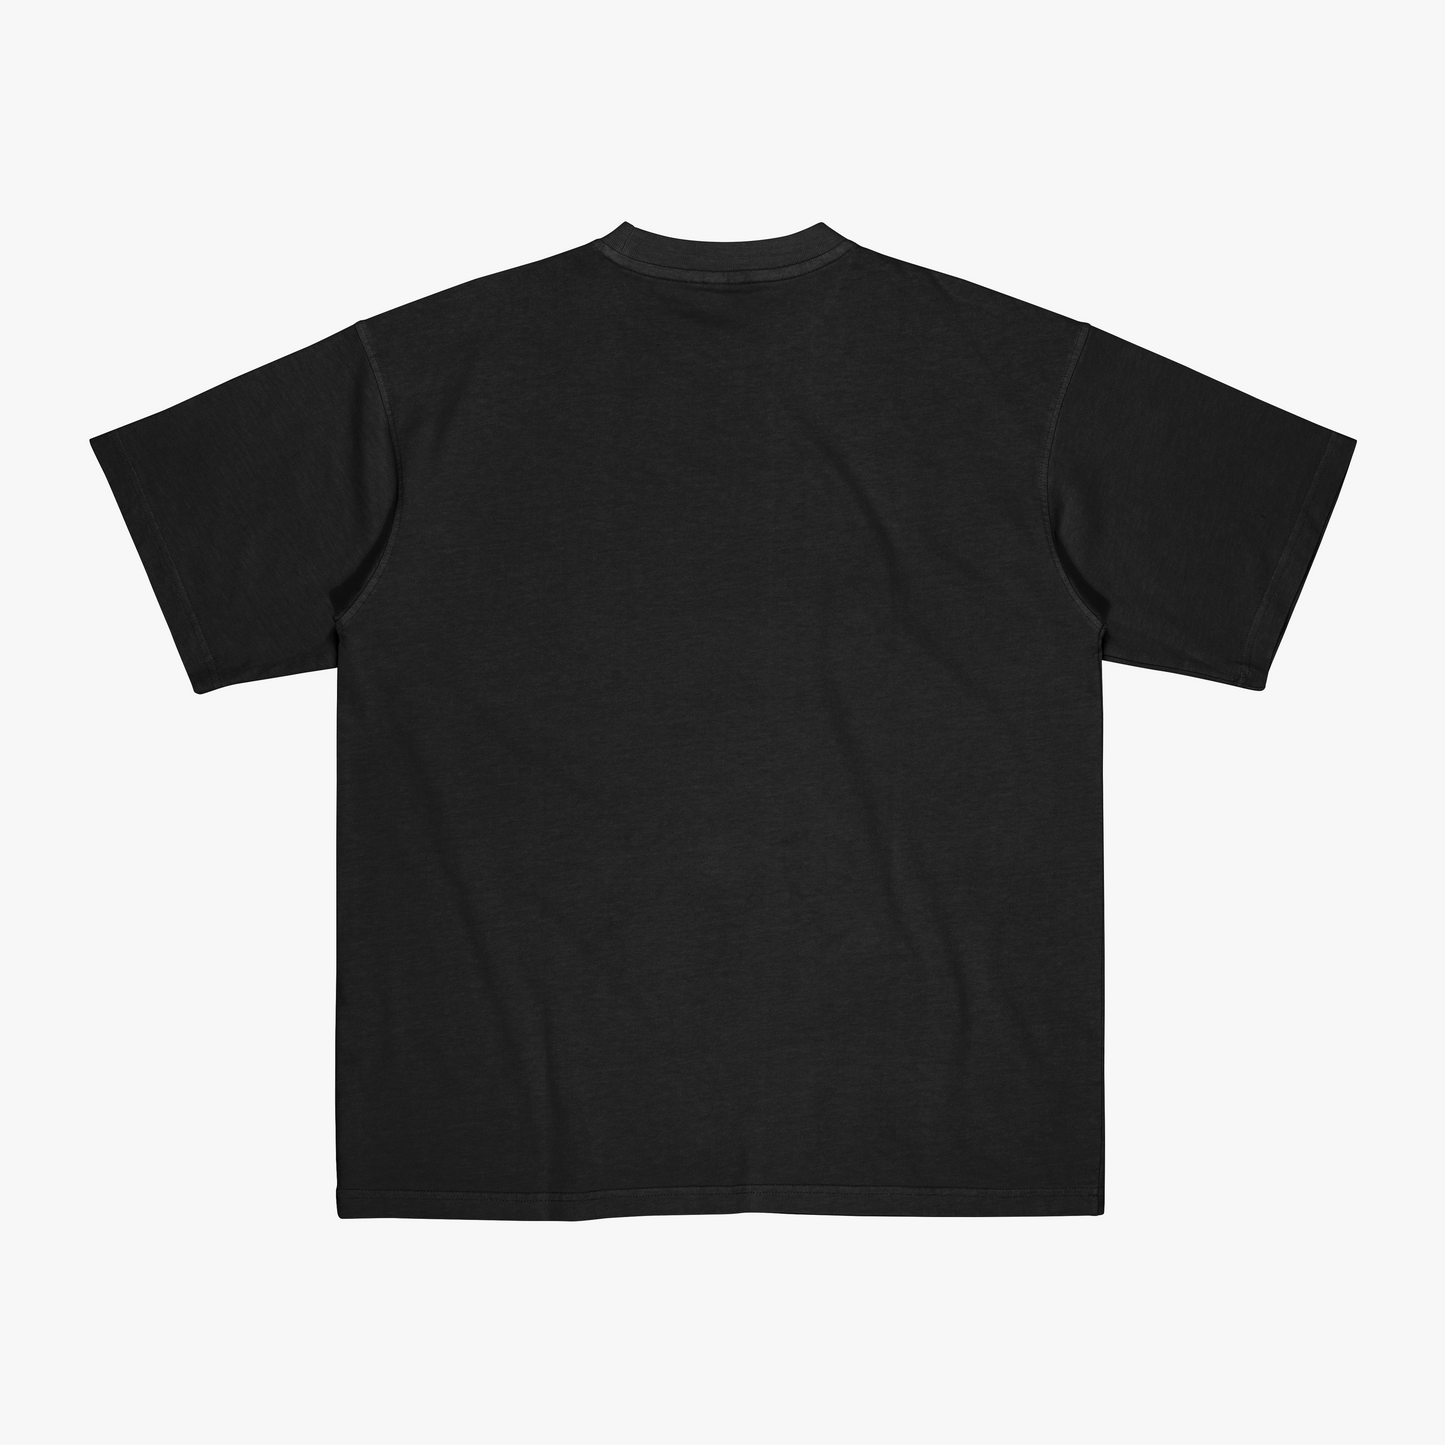 FakeButReal Bootleg Steph Curry Oversize Black Tee